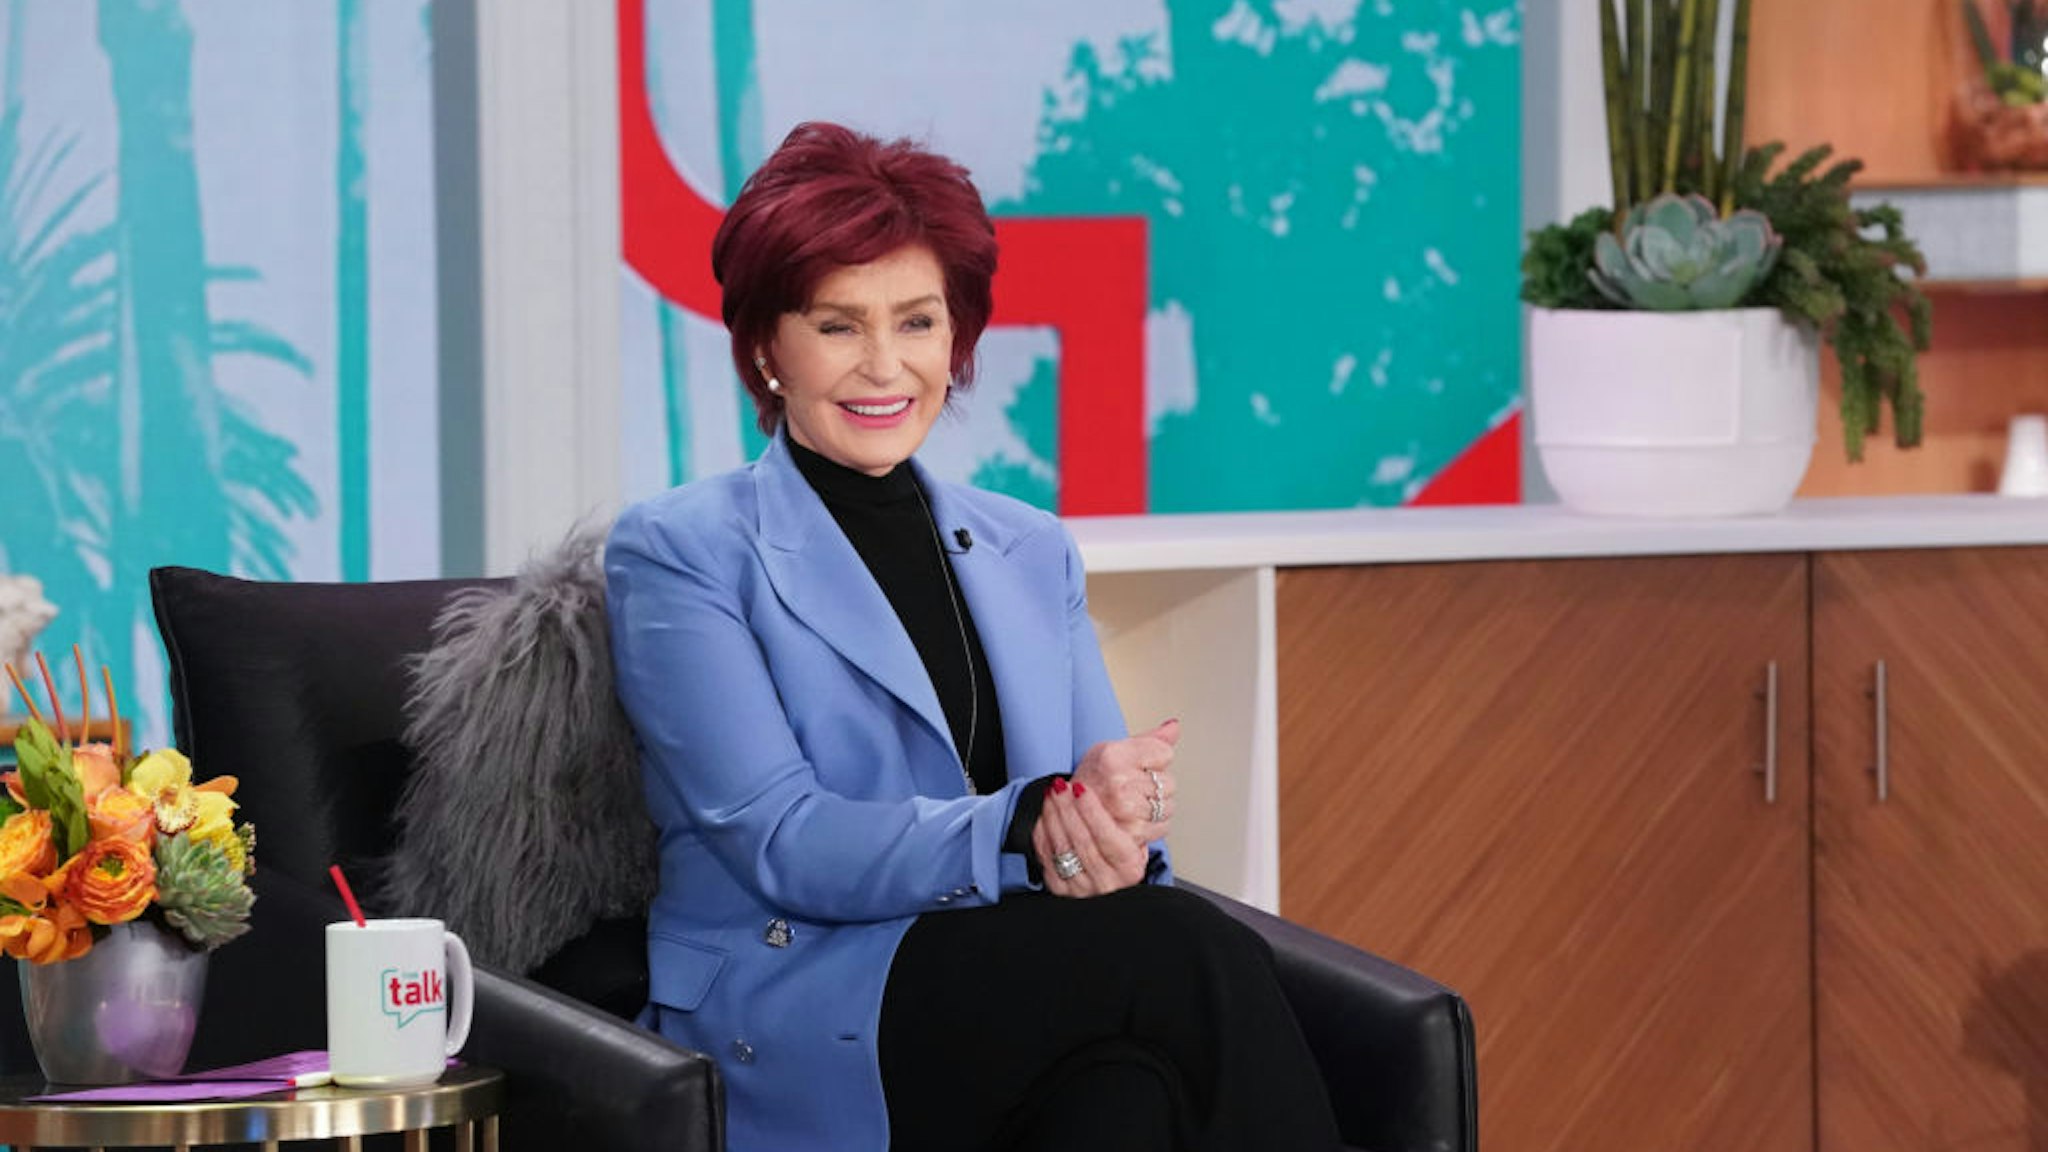 LOS ANGELES - FEBRUARY 19: "The Talk," Friday, February 19th, 2021 on the CBS Television Network. Sharon Osbourne, shown. Guests: Storm Reid and Ross Butler. (Photo by Monty Brinton/CBS via Getty Images)